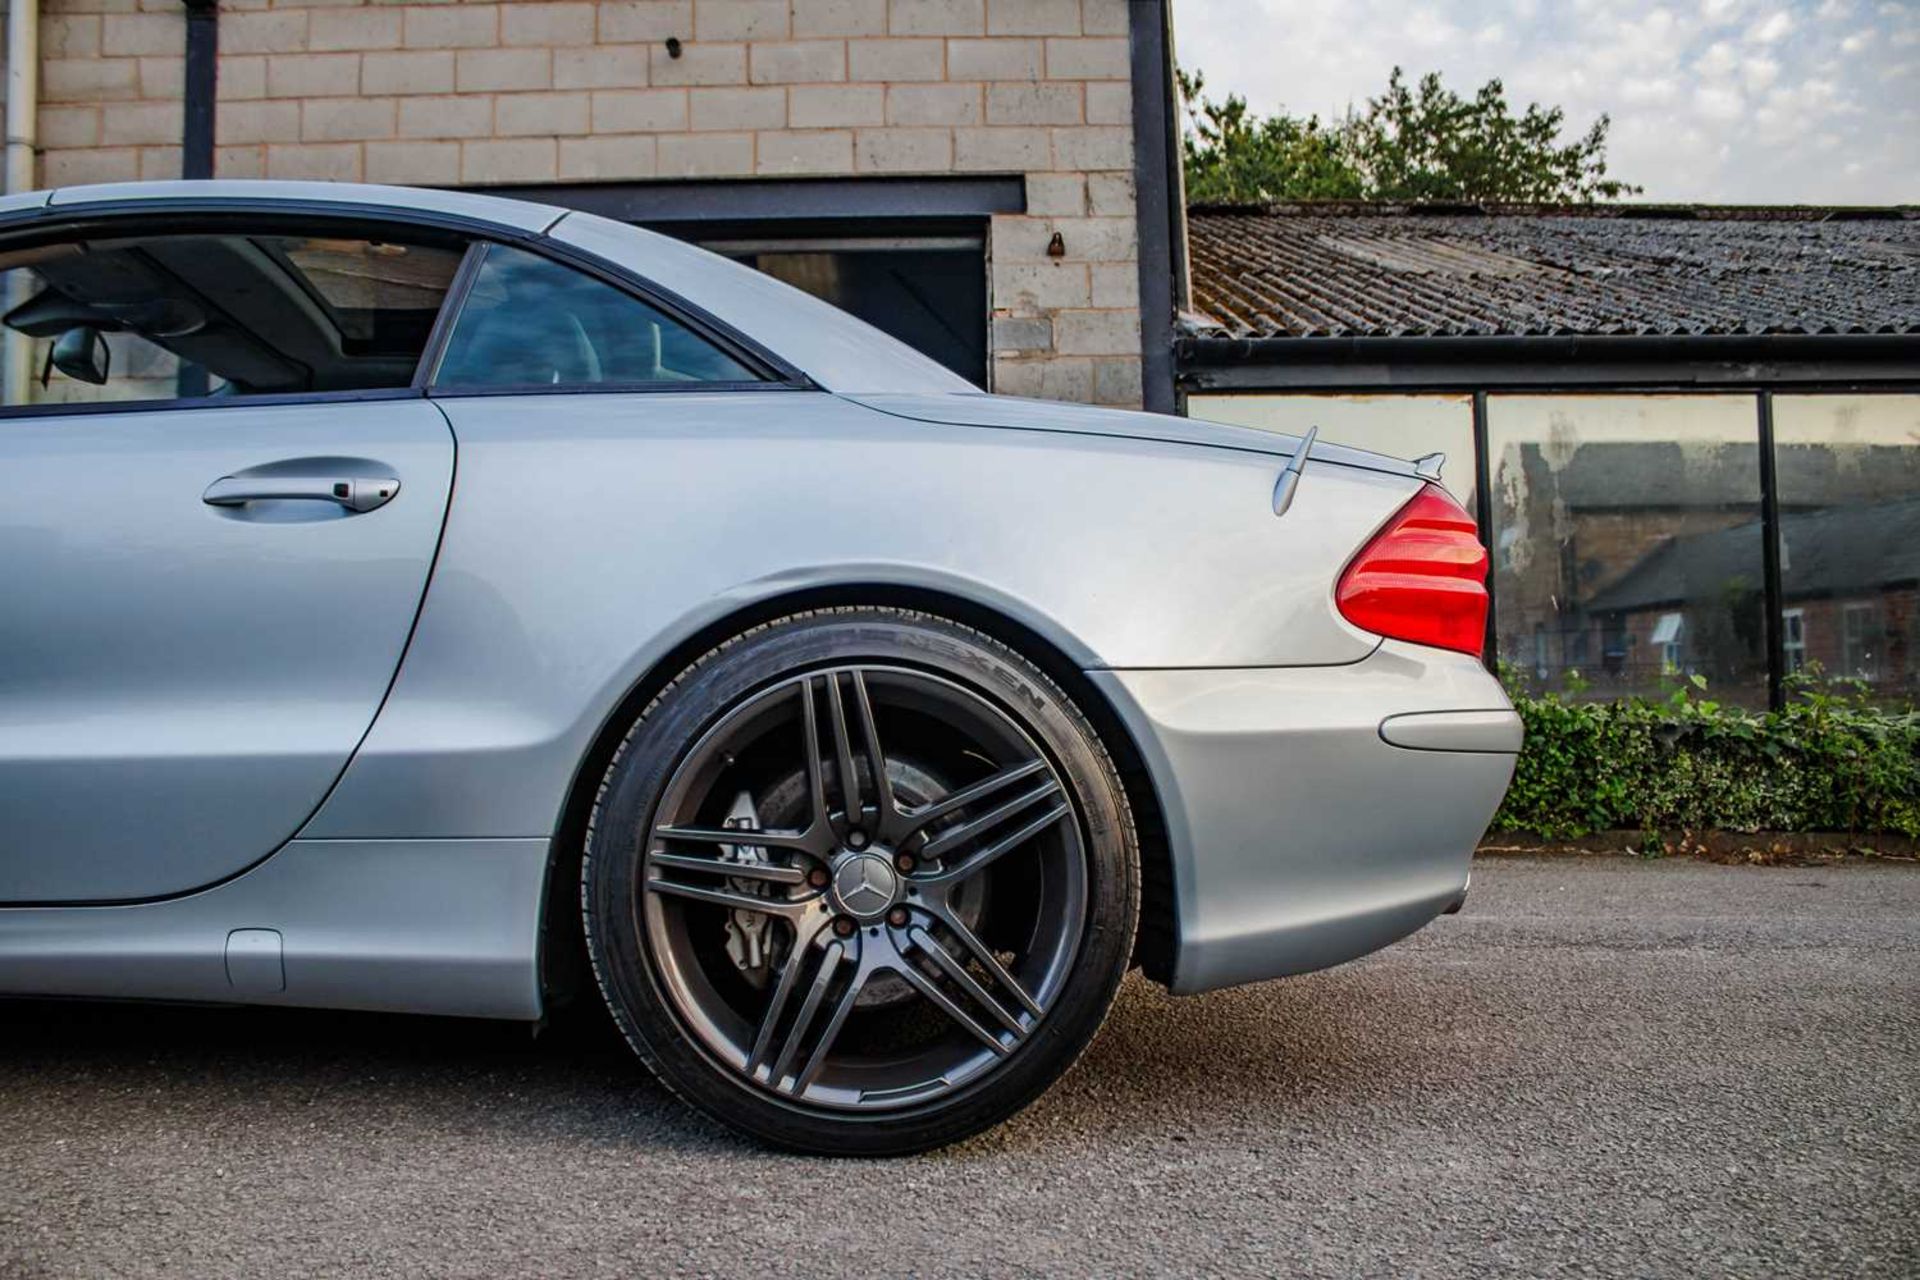 2004 Mercedes SL600 Flagship, 493bhp twin-turbo powered model  - Image 11 of 42